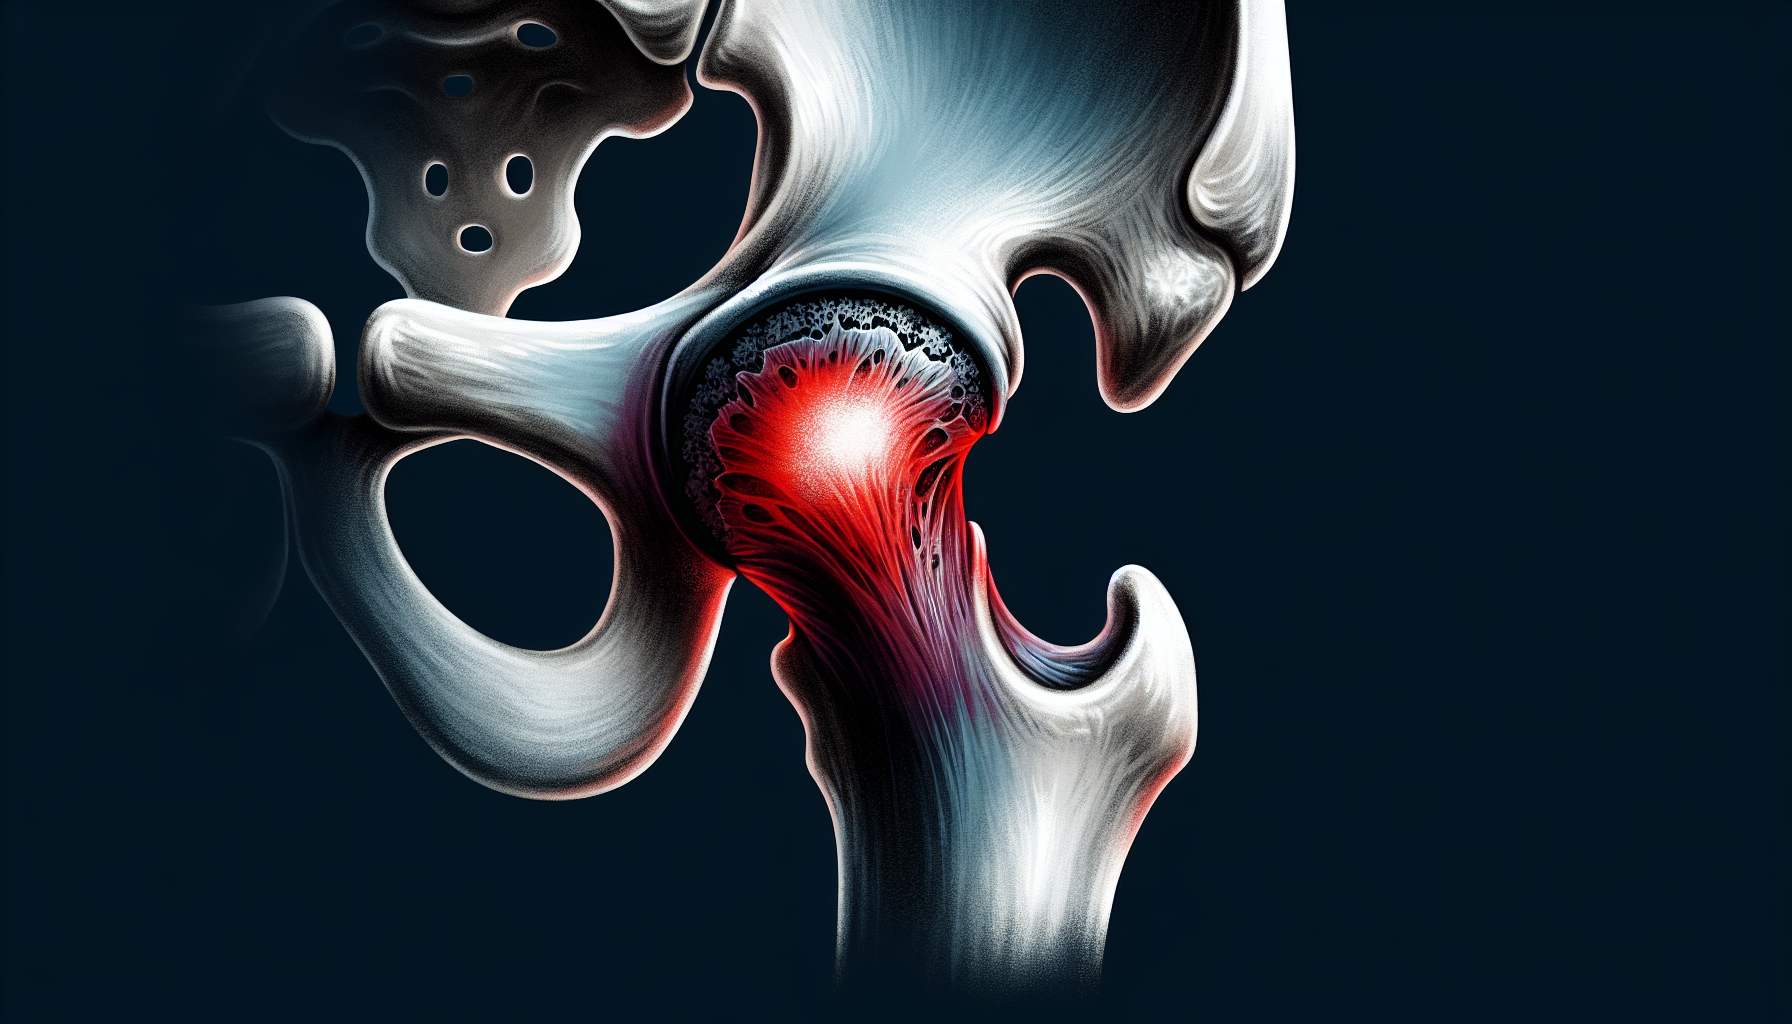 Illustration of a hip joint affected by arthritis